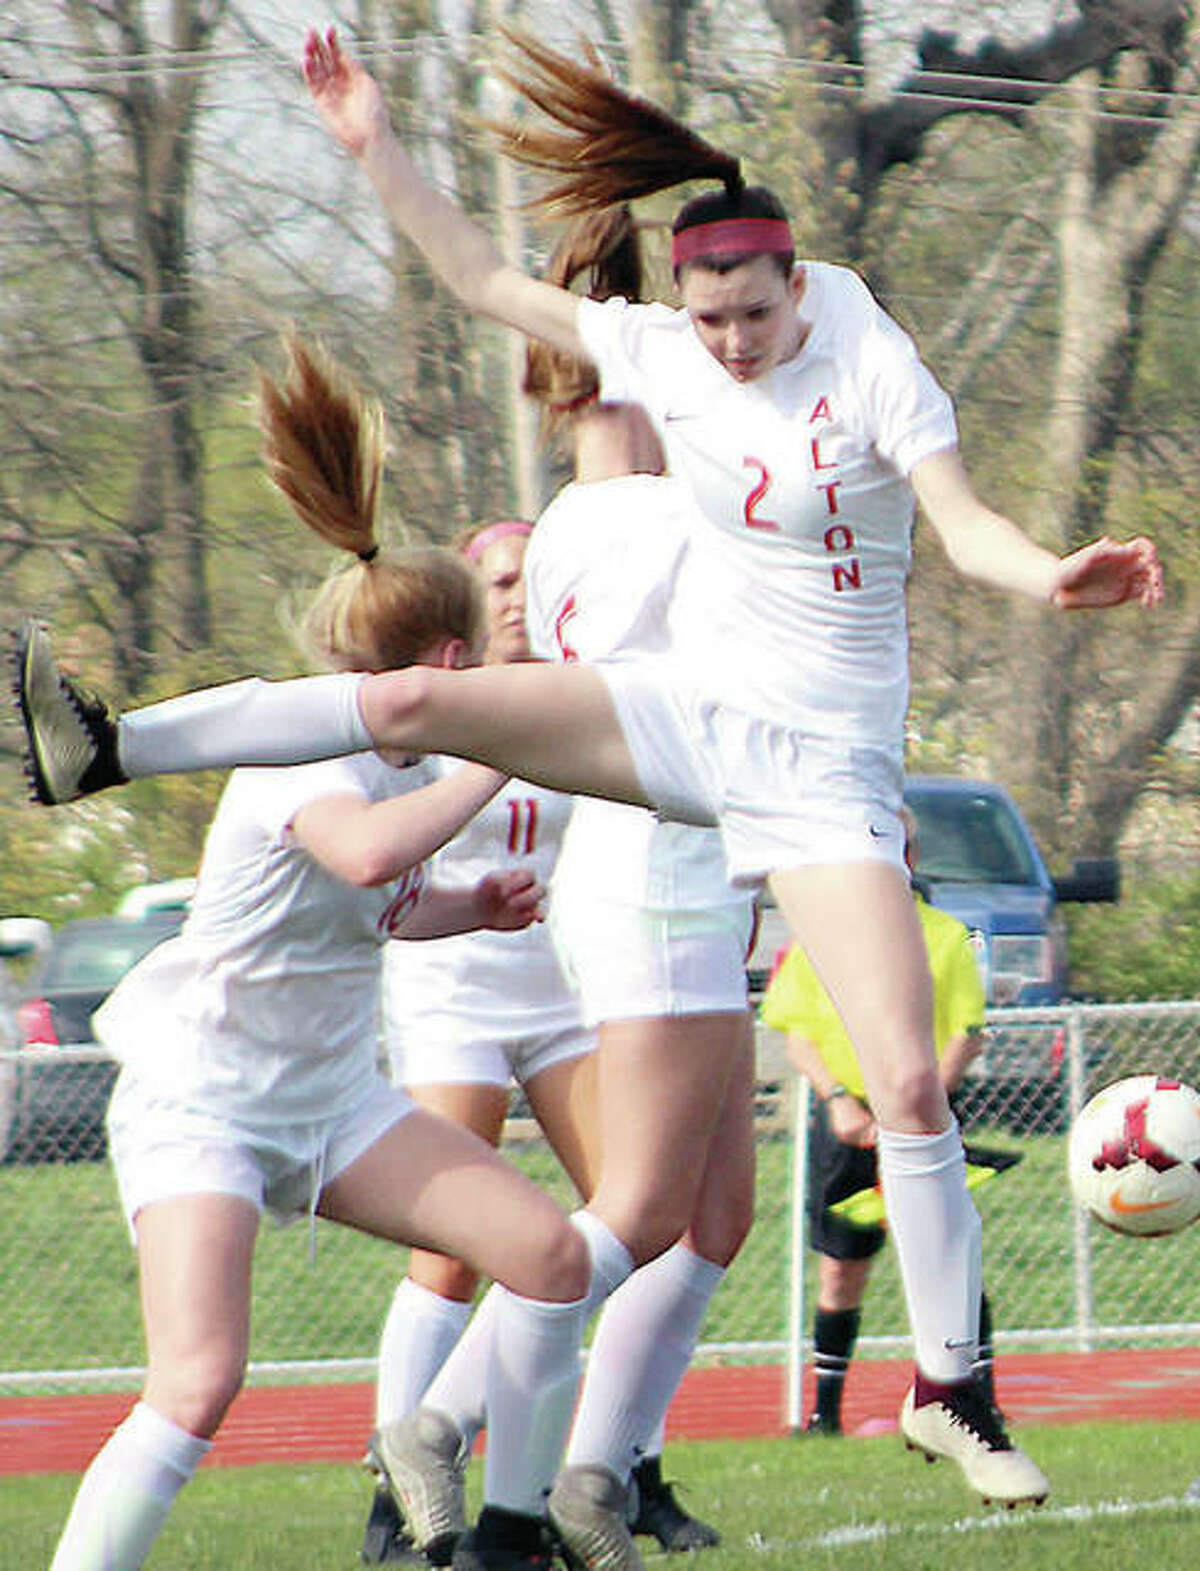 Megan Zini of Alton (2) goes high to deflect the ball during action against Edwardsville Thursday at Alton High.